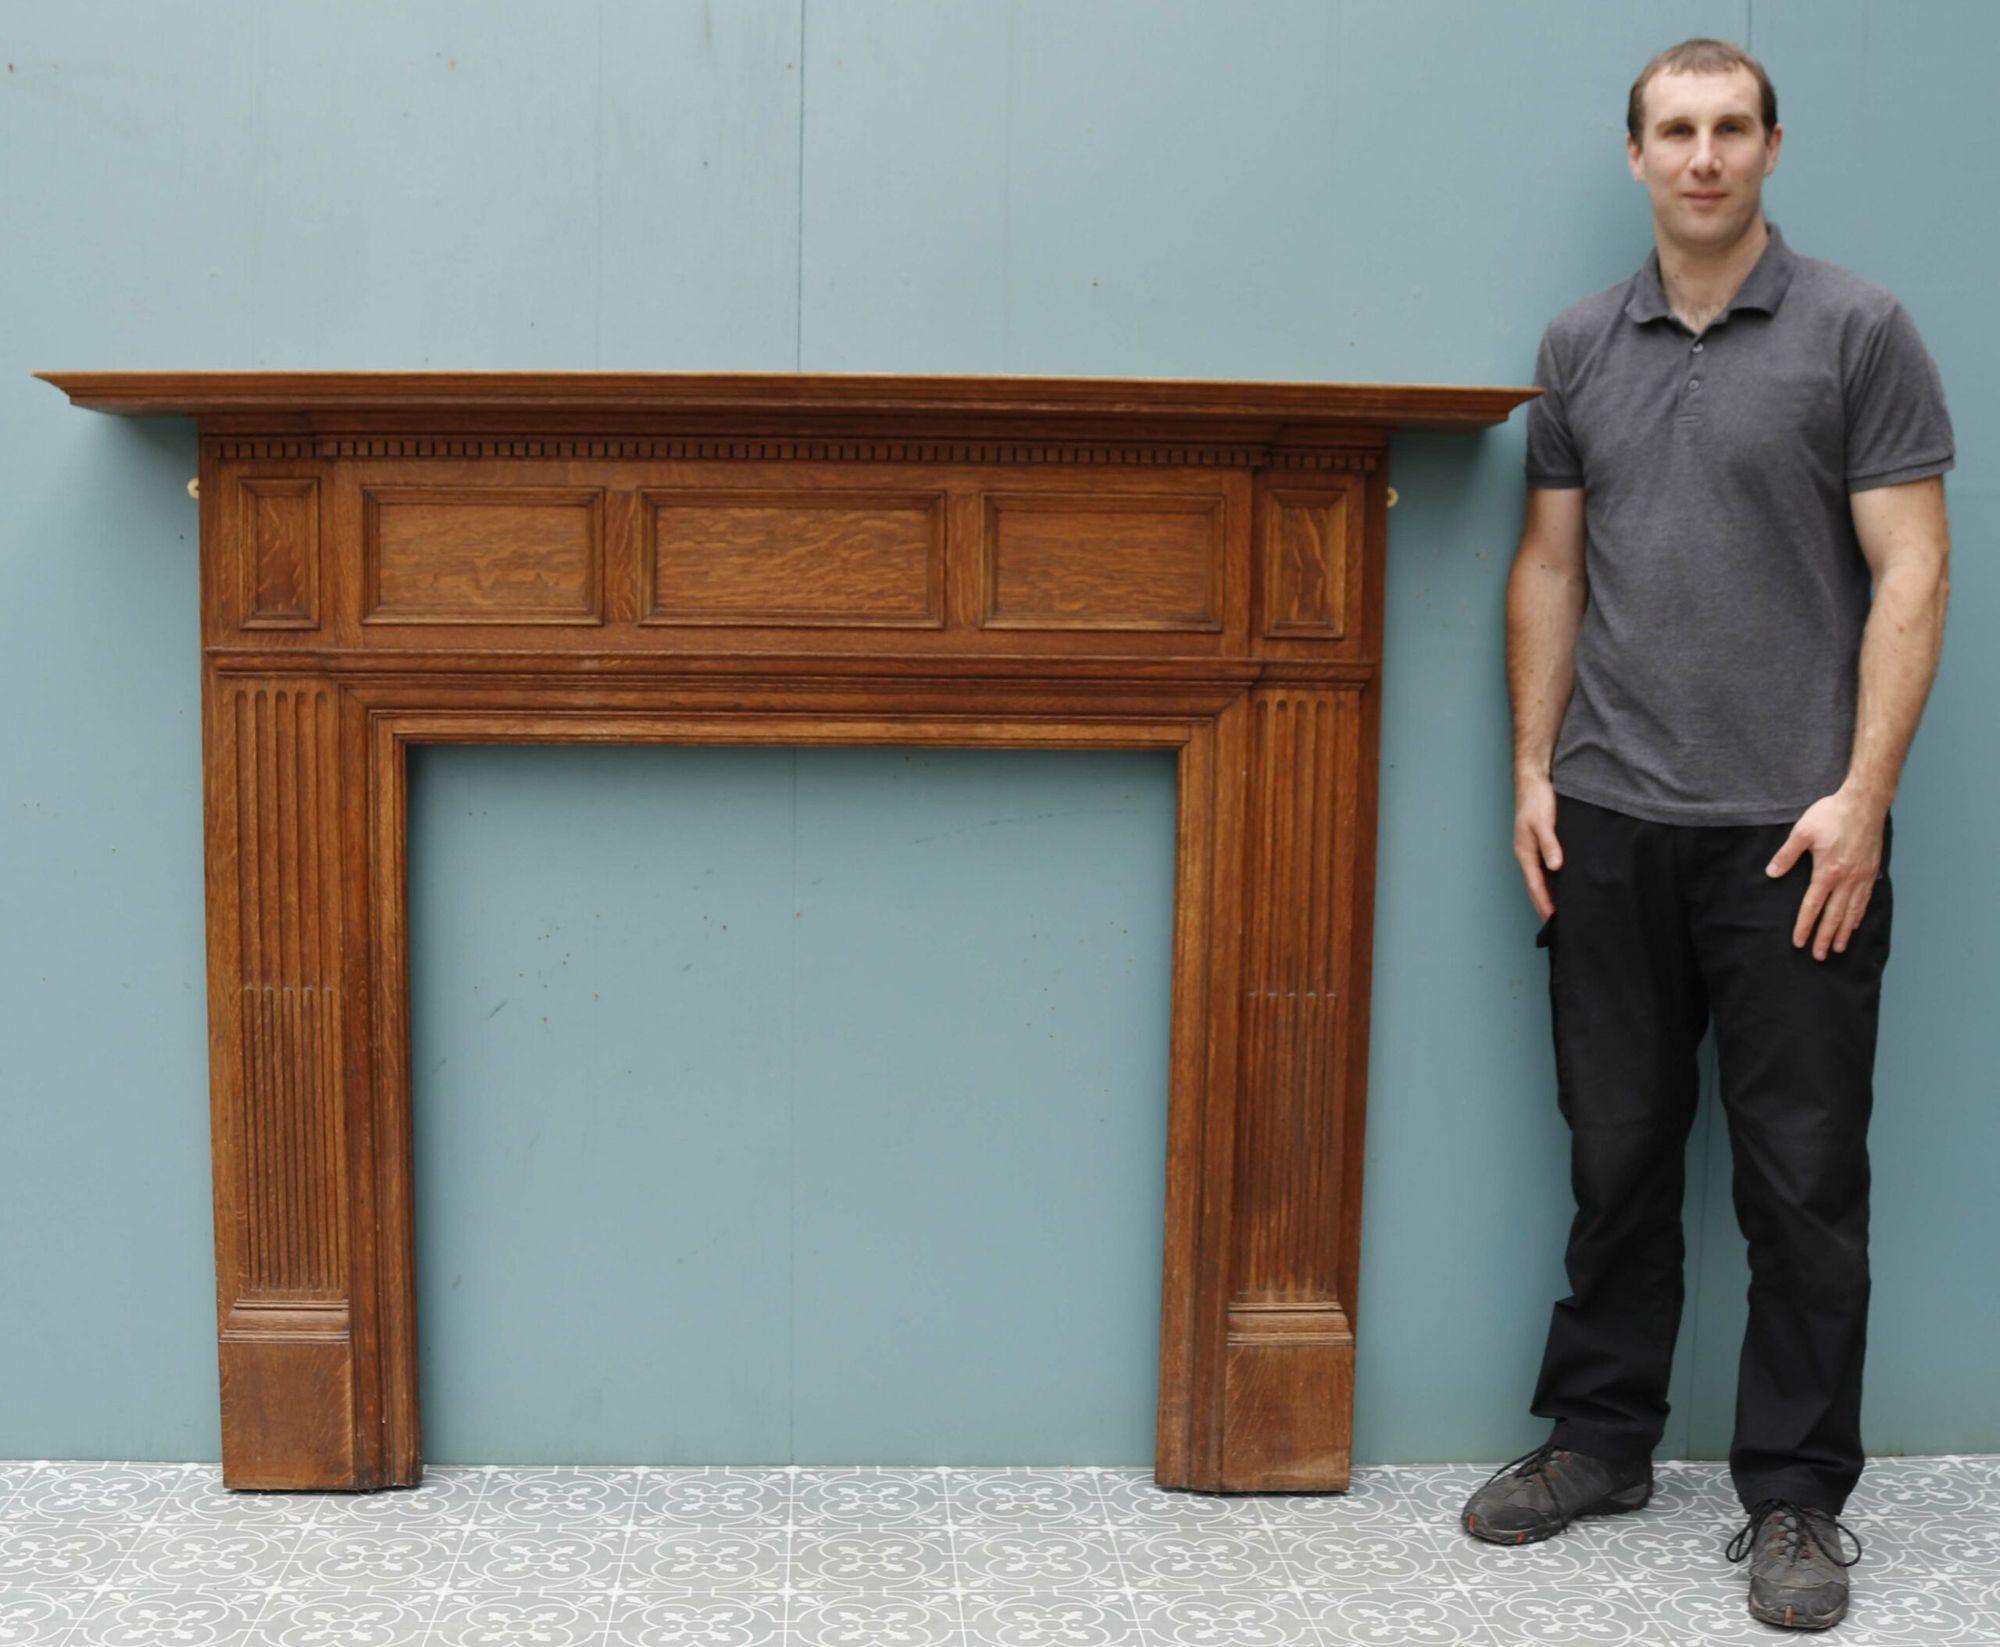 An antique fire mantel in Edwardian style. Crafted in oak with a panelled frieze and fluted jambs.
 
Additional dimensions:
Opening height 97 cm
Opening width 96.5 cm
Width across the foot blocks 149 cm.